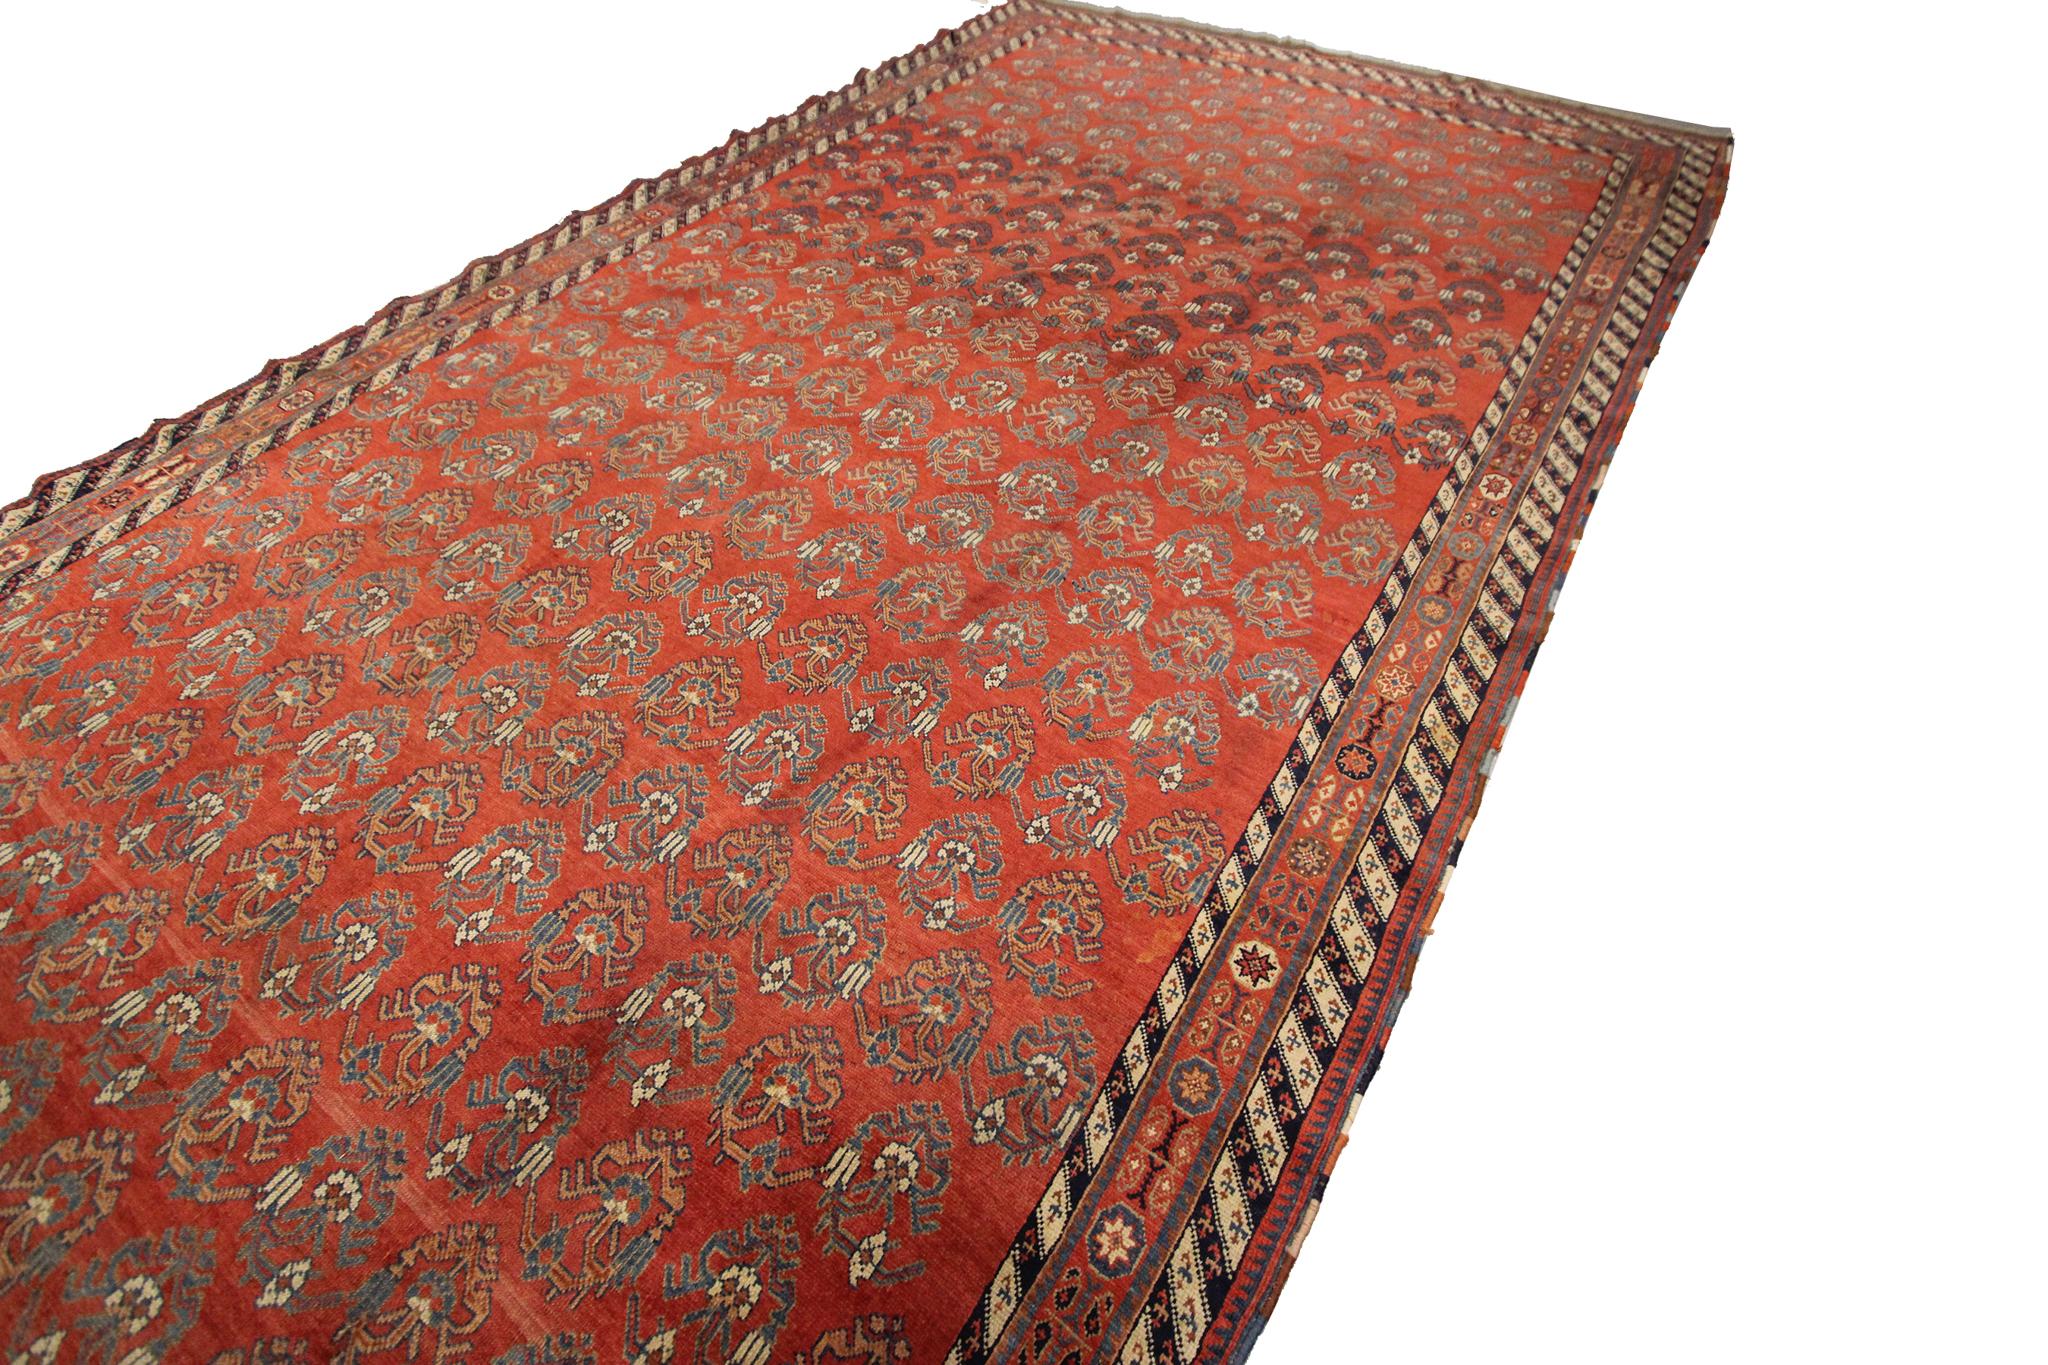 Hand-Knotted 1880 Antique Afshar Rug Persian Rug Geometric Wool Foundation 7x12 206cmx376cm For Sale